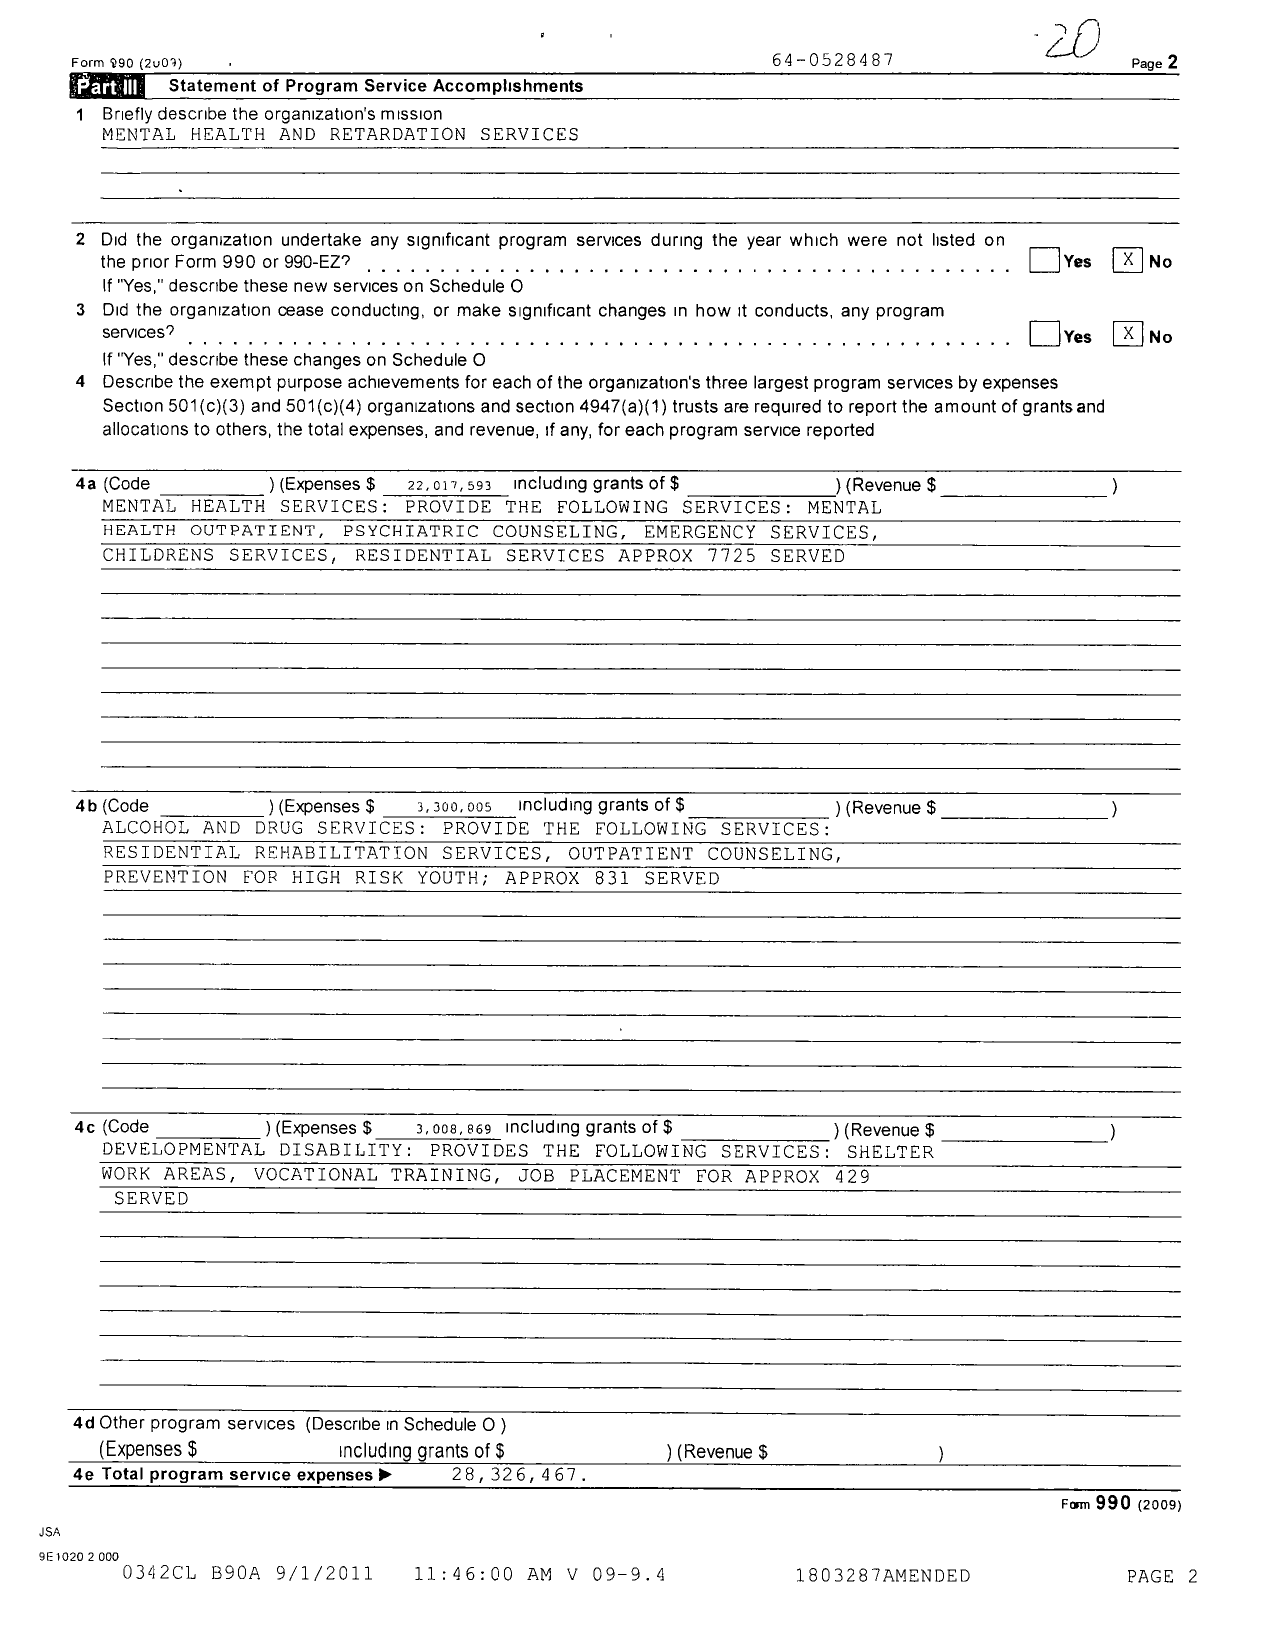 Image of first page of 2009 Form 990R for Region Xii Commission on Mental Health and Retardation